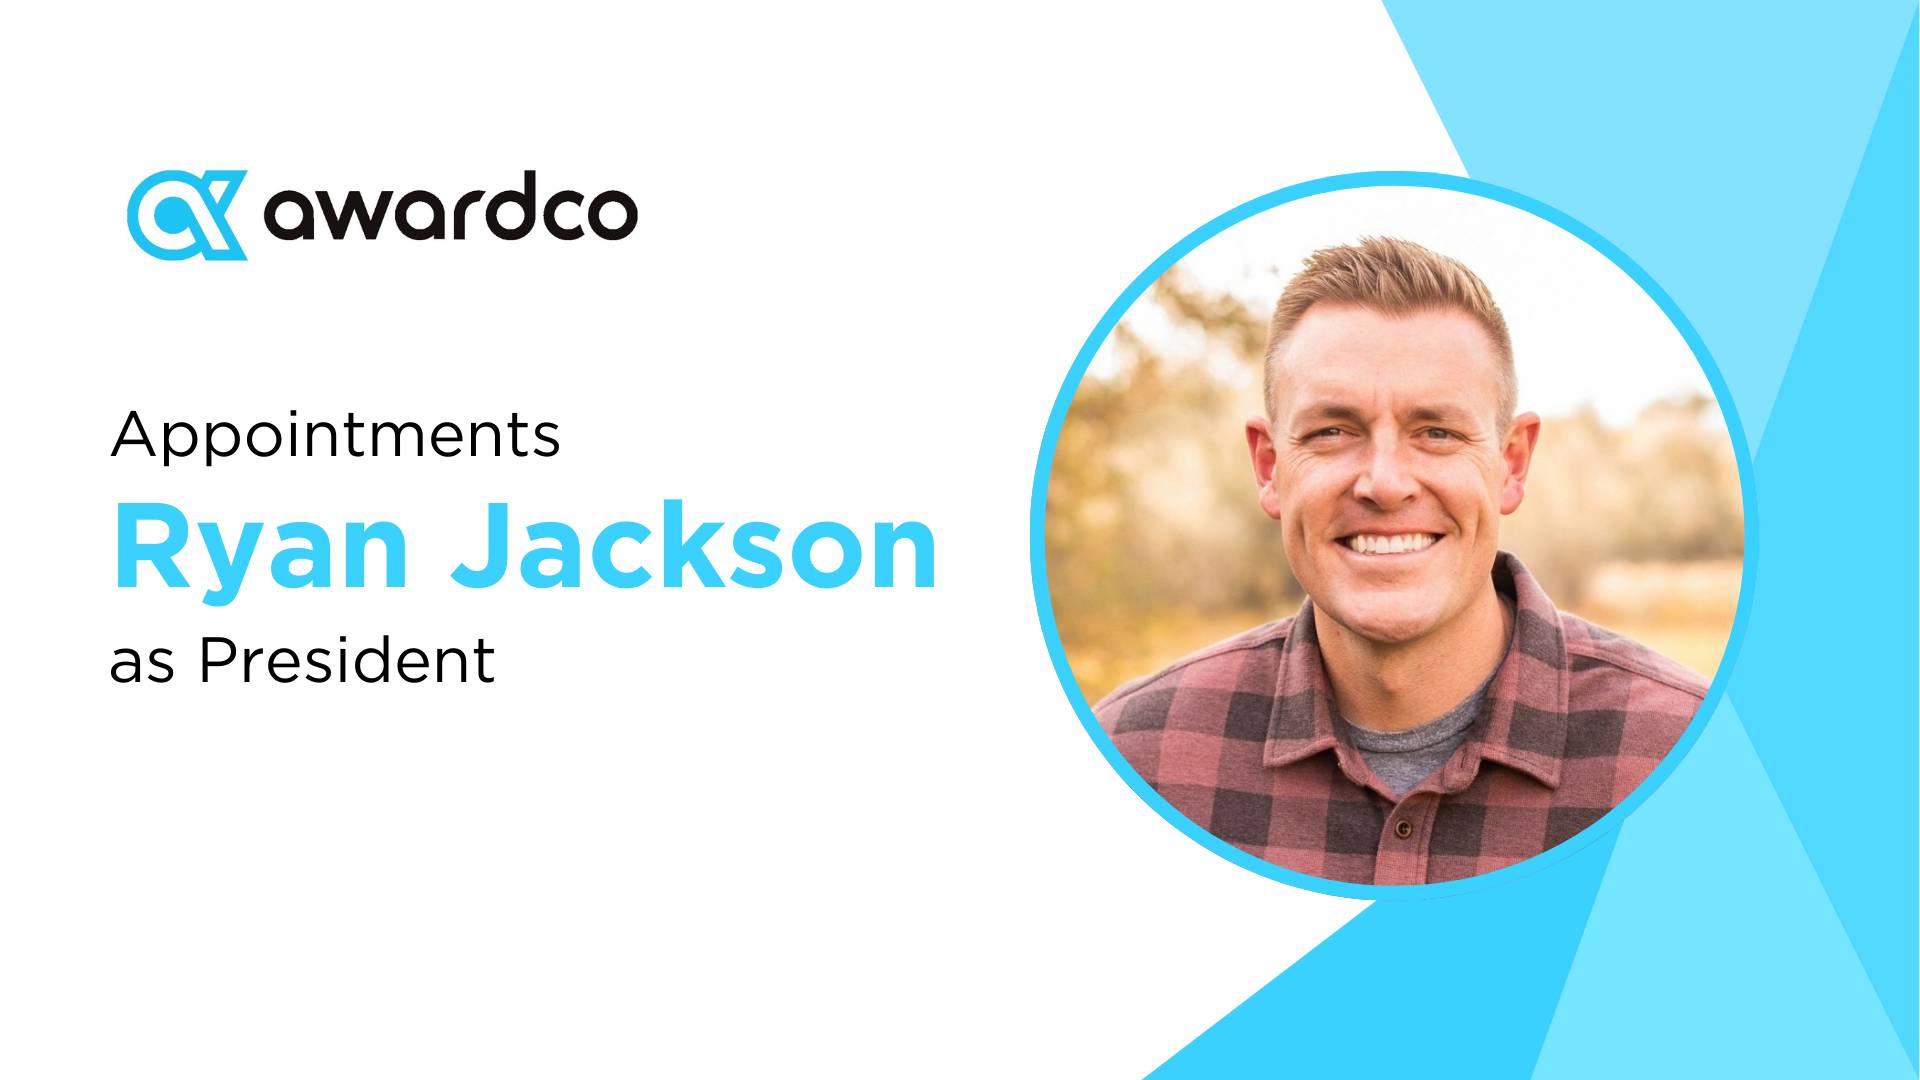 Awardco Appoints Ryan Jackson as President, Bringing Extensive Leadership Experience to Drive Growth